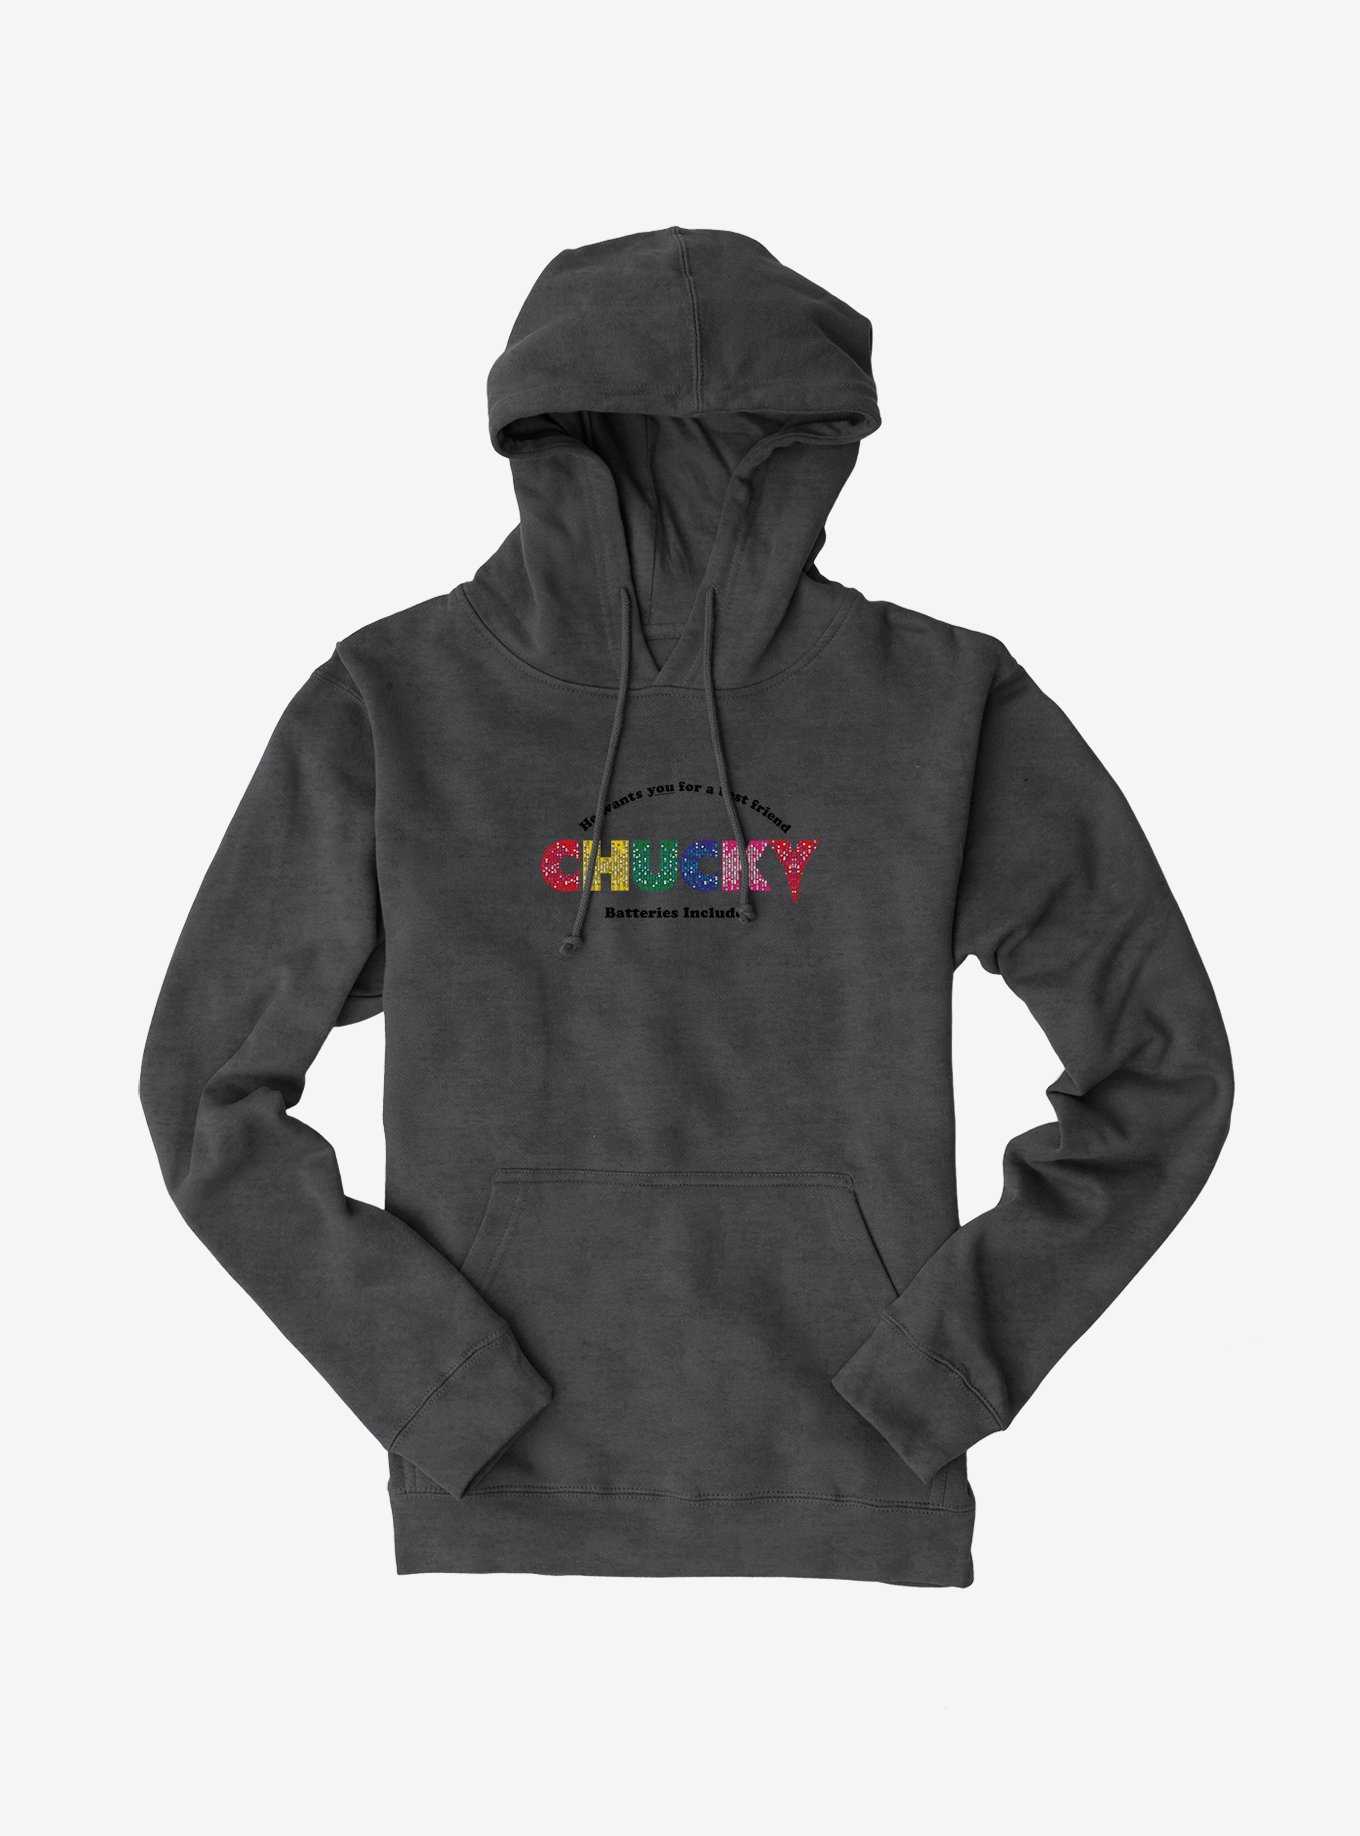 Chucky Batteries Included Hoodie, , hi-res